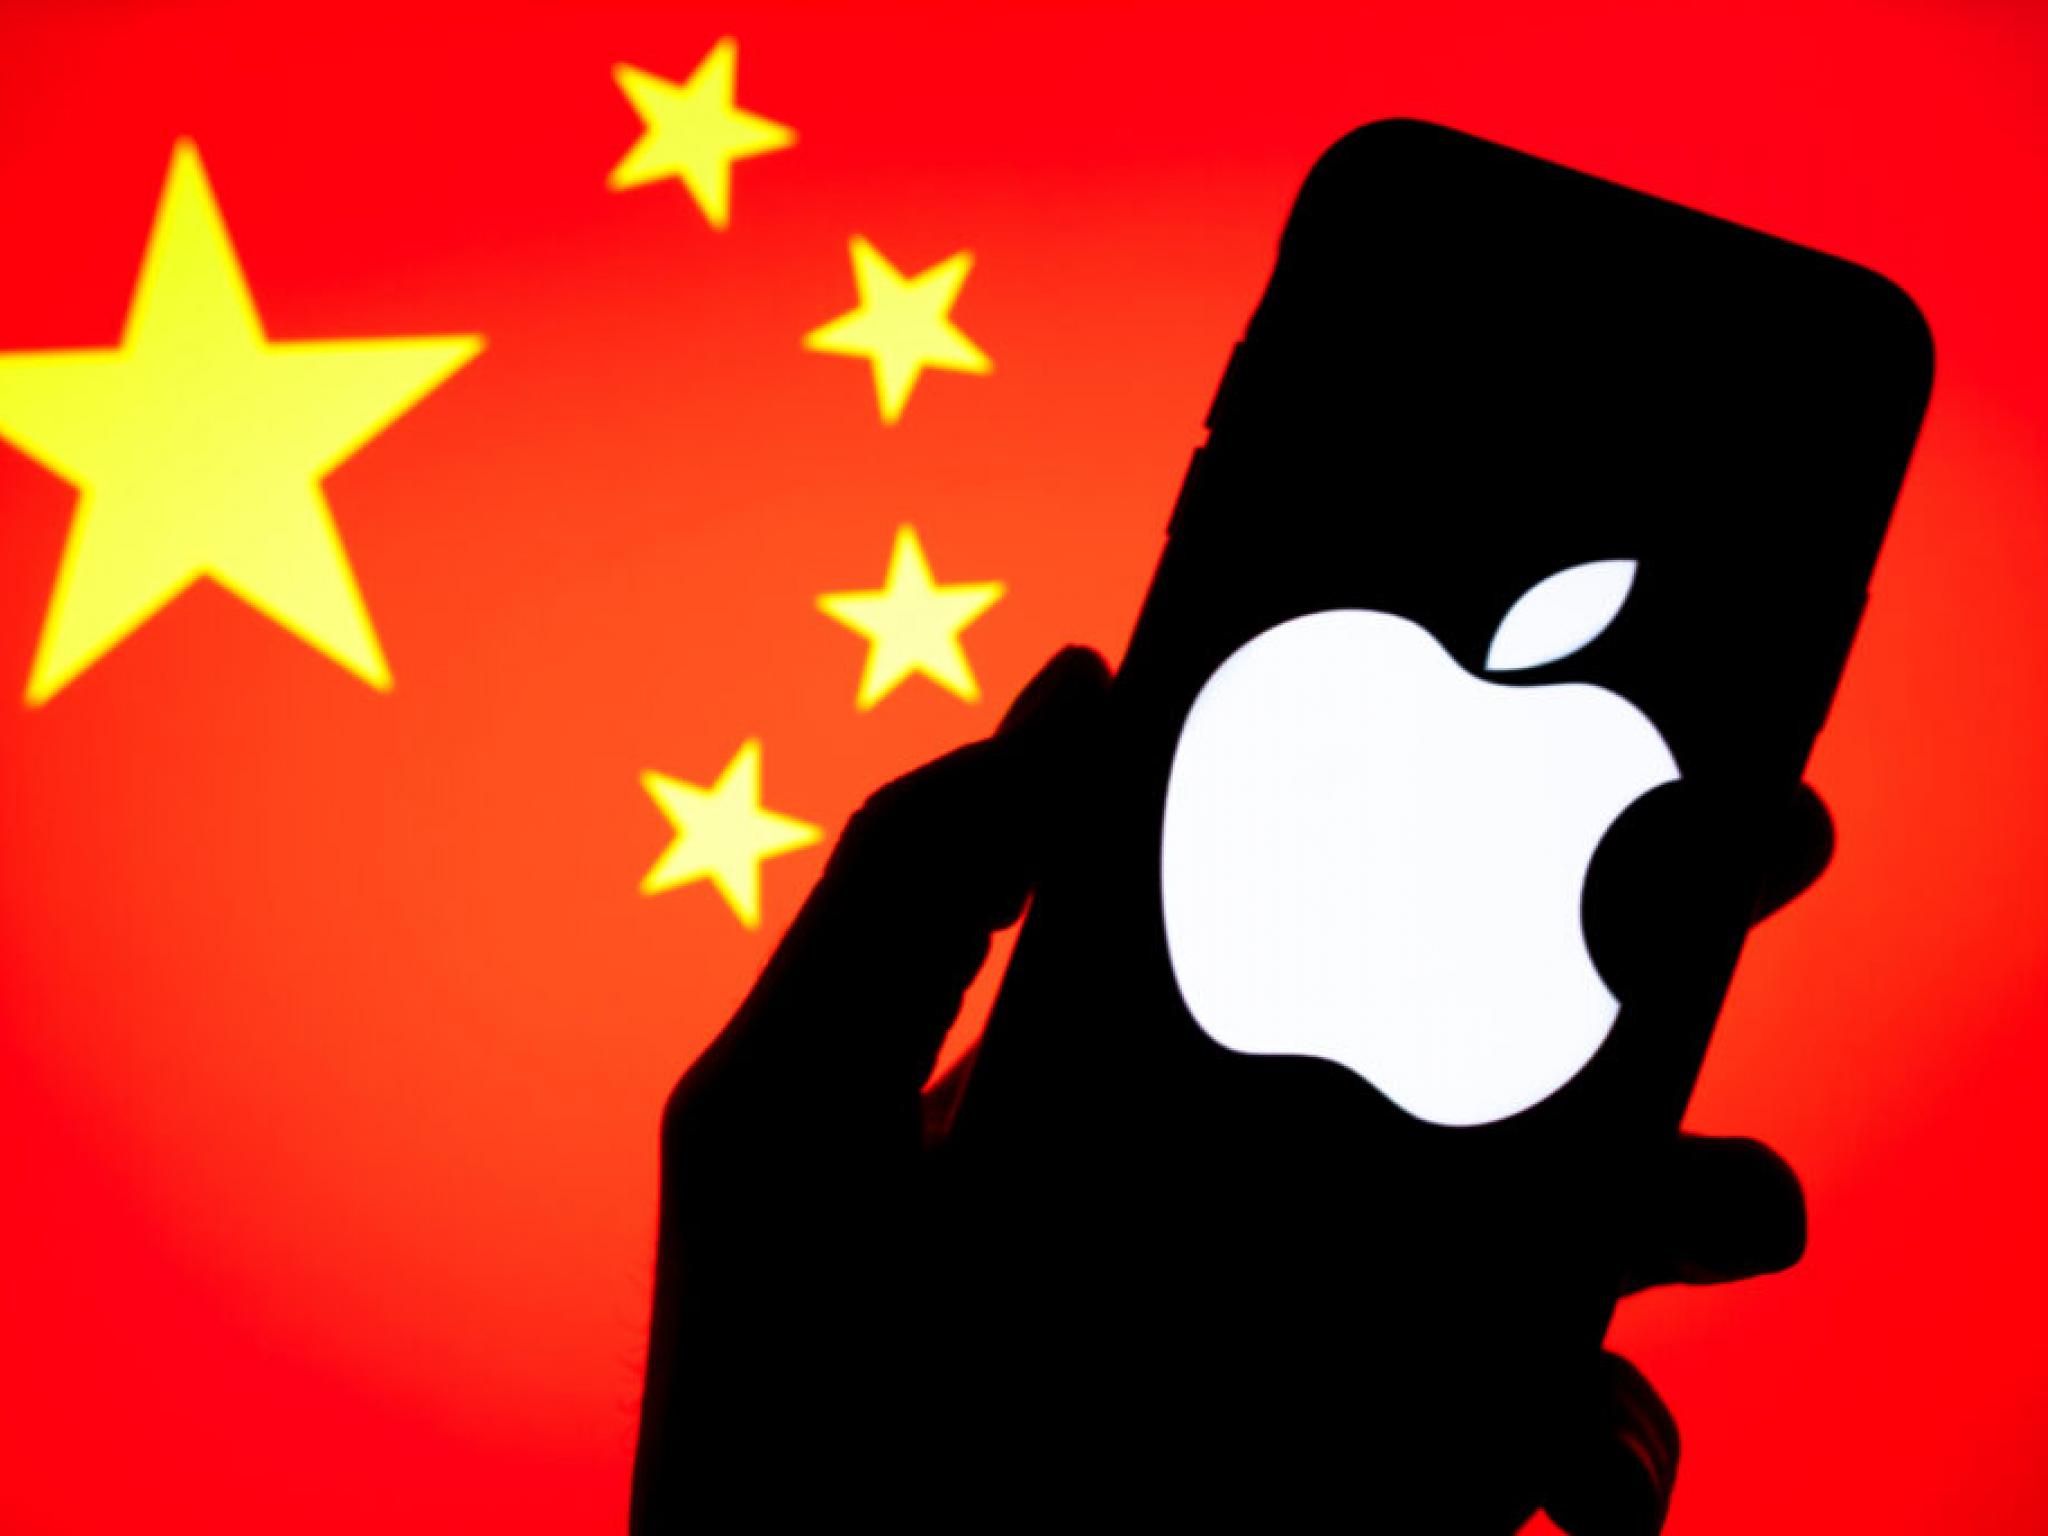  craig-federighi-says-tim-cook-led-company-is-trying-to-find-a-way-to-bring-apple-intelligence-to-iphones-in-china-as-rivals-team-up-with-baidu 